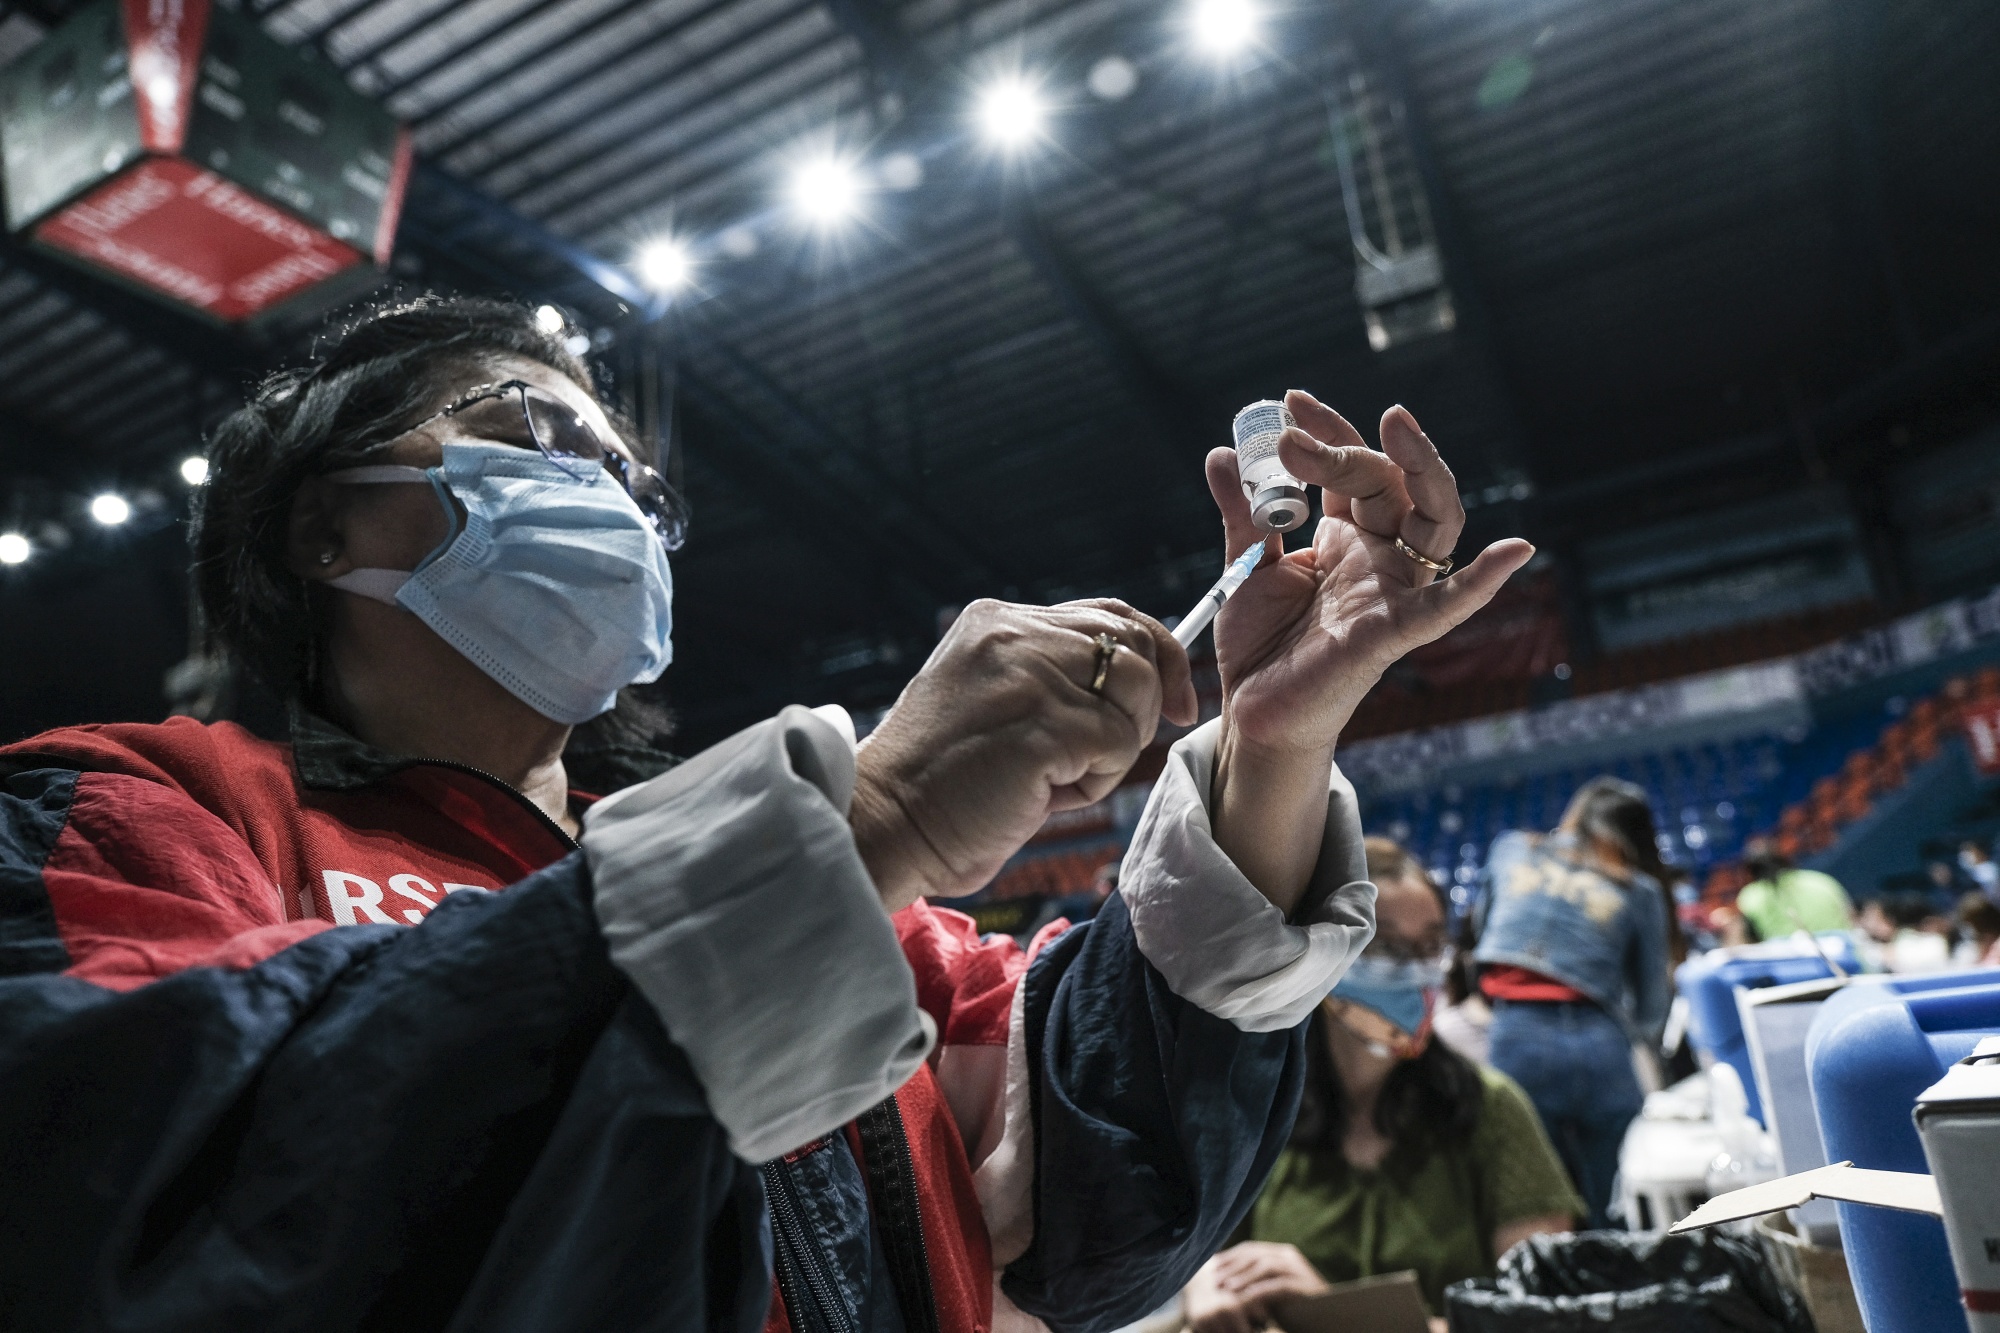 A health worker prepares a dose of the Moderna Covid-19 vaccine at a vaccination site inside a gymnasium in San Juan City, Metro Manila, on Dec. 28, 2021.